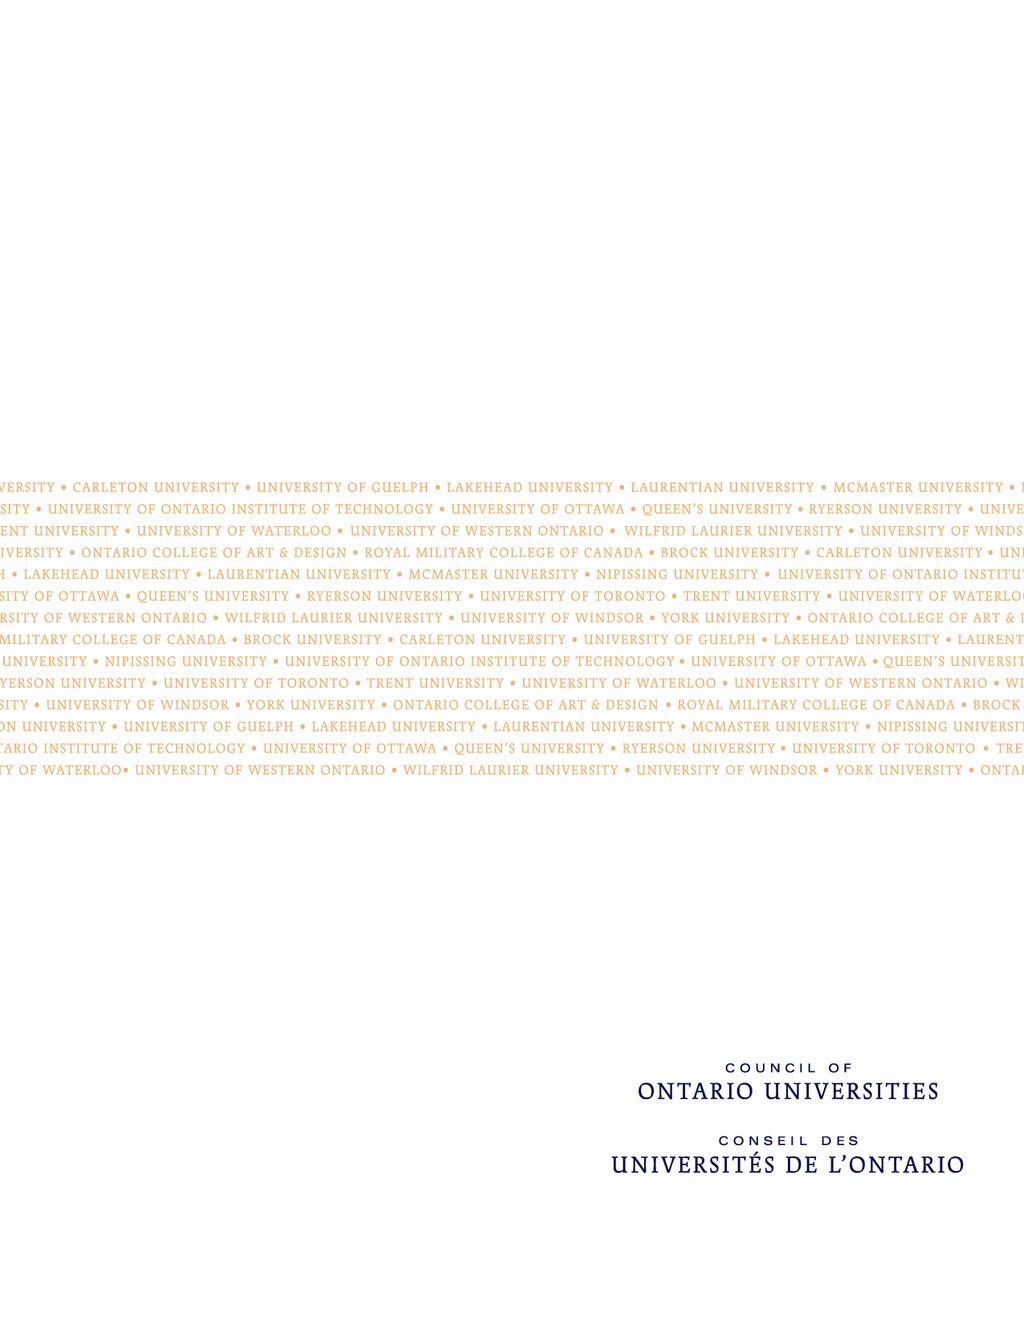 Financial Report of Ontario Universities 2013-14 Highlights Council